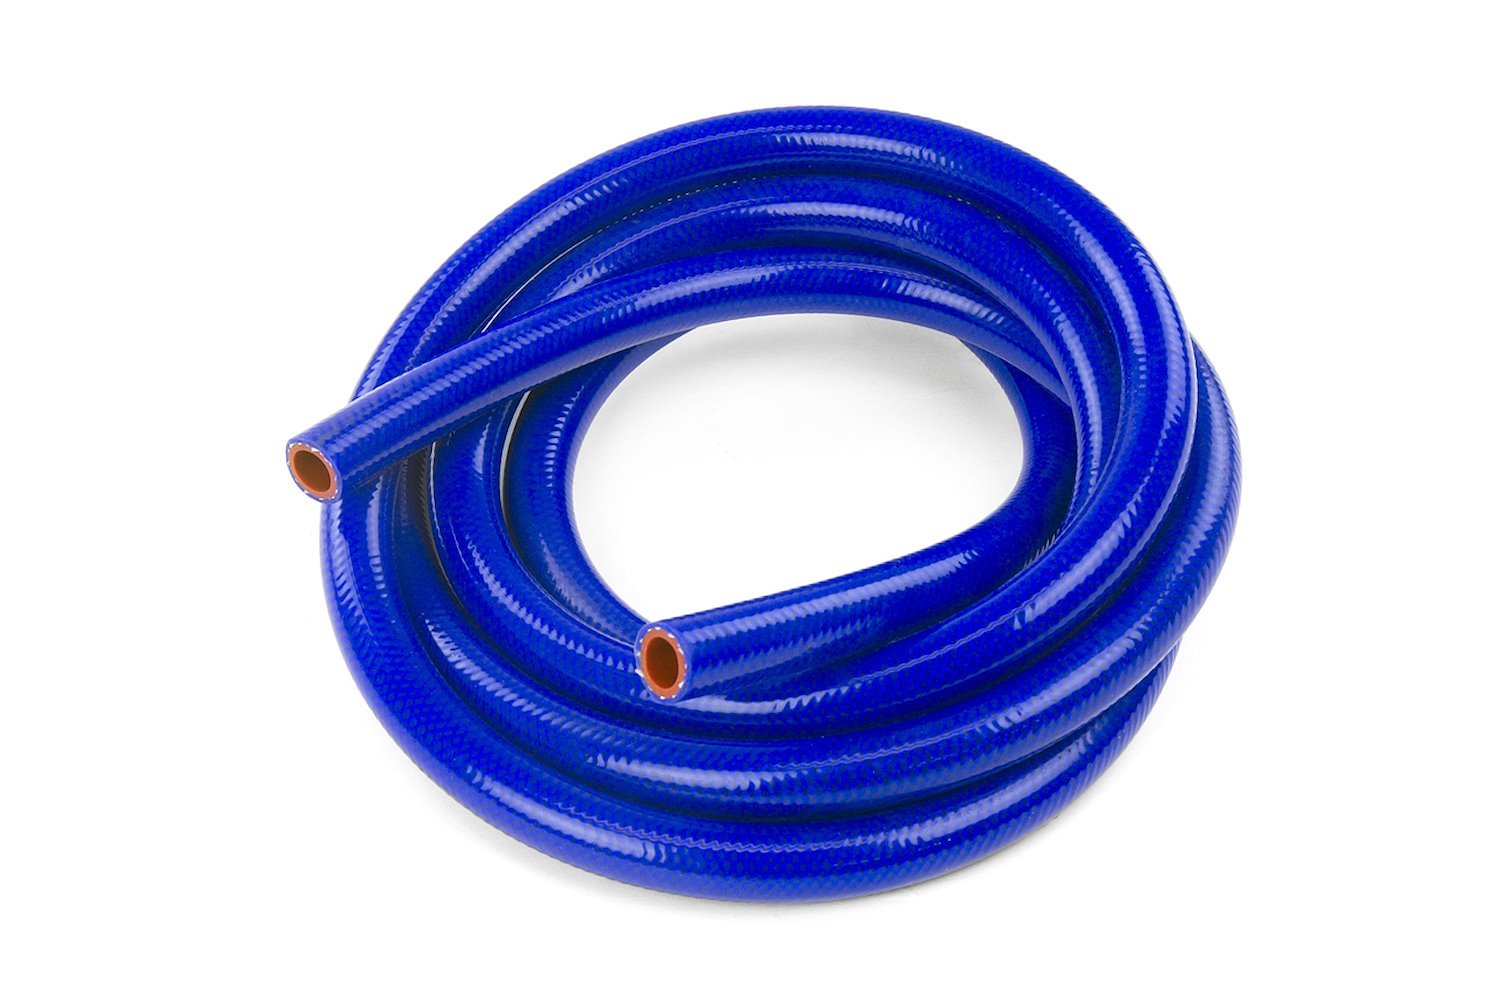 HTHH-016-BLUEx10 Silicone Heater Hose Tubing, High-Temp Reinforced, 5/32 in. ID, 10 ft. Roll, Blue